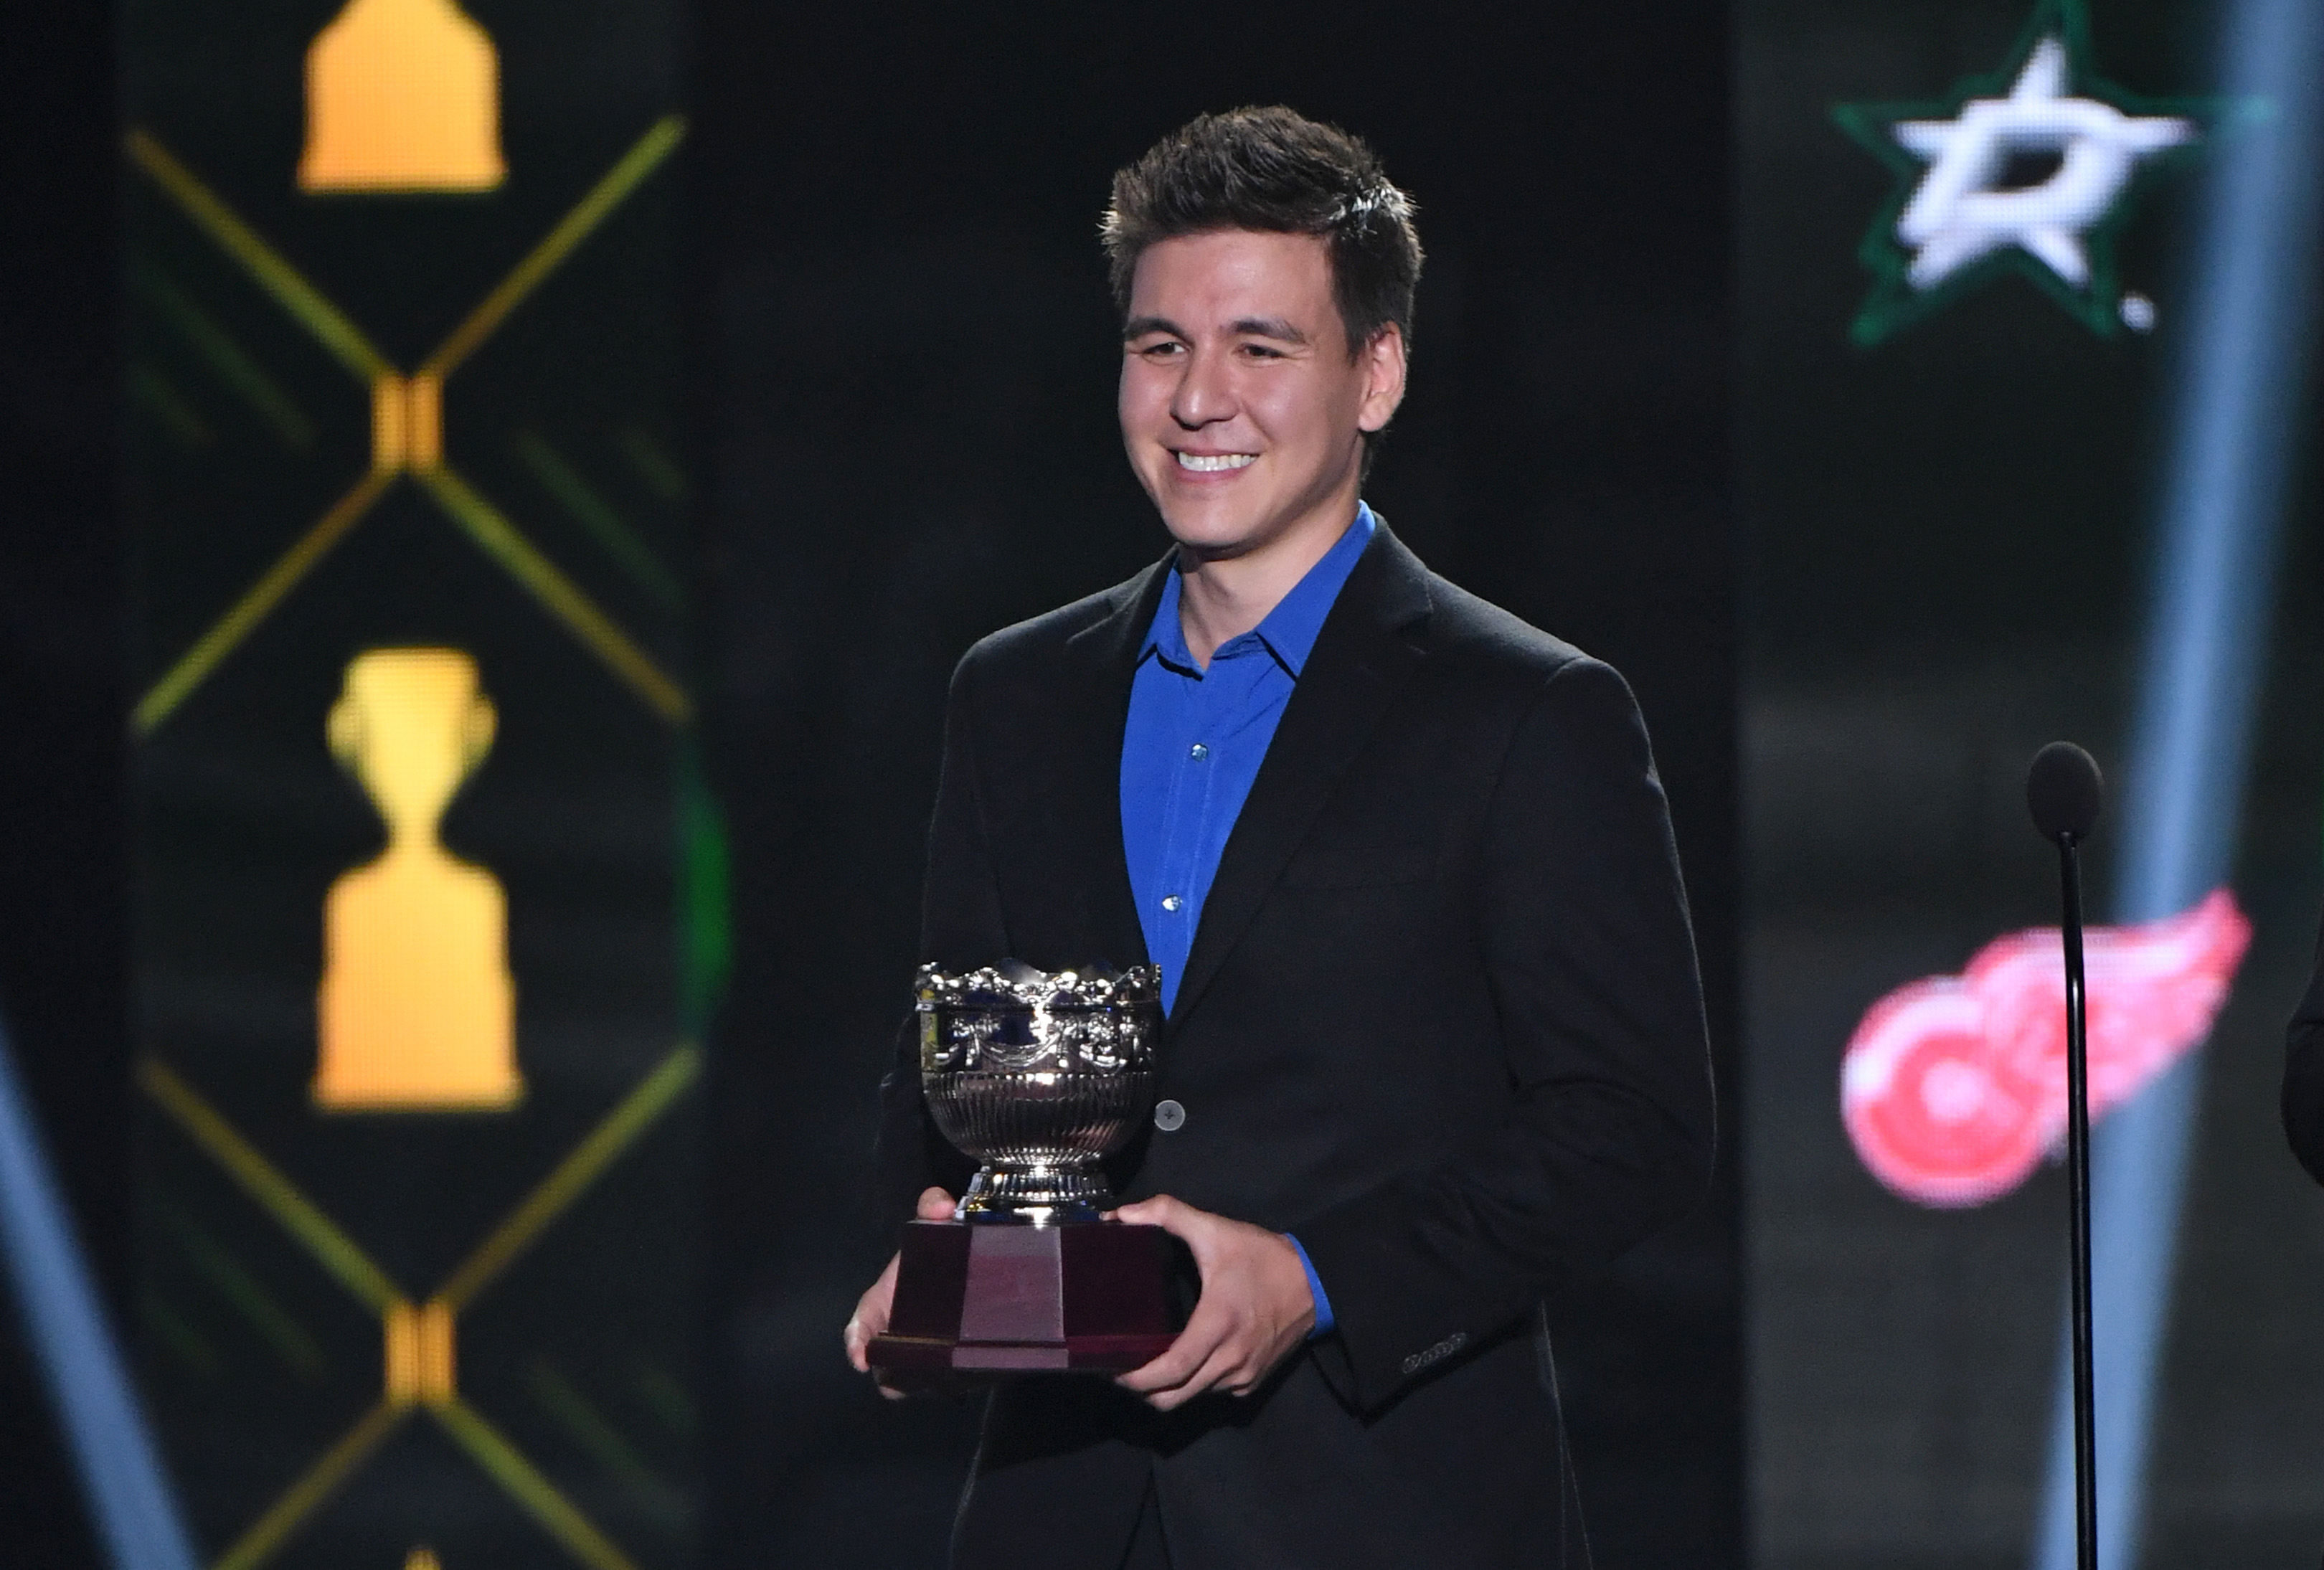 James Holzhauer, 'Jeopardy!' champion and professional sports gambler, prepares to present a trophy at the 2019 NHL Awards in Las Vegas, Nevada, on June 19, 2019. (Ethan Miller/Getty Images)